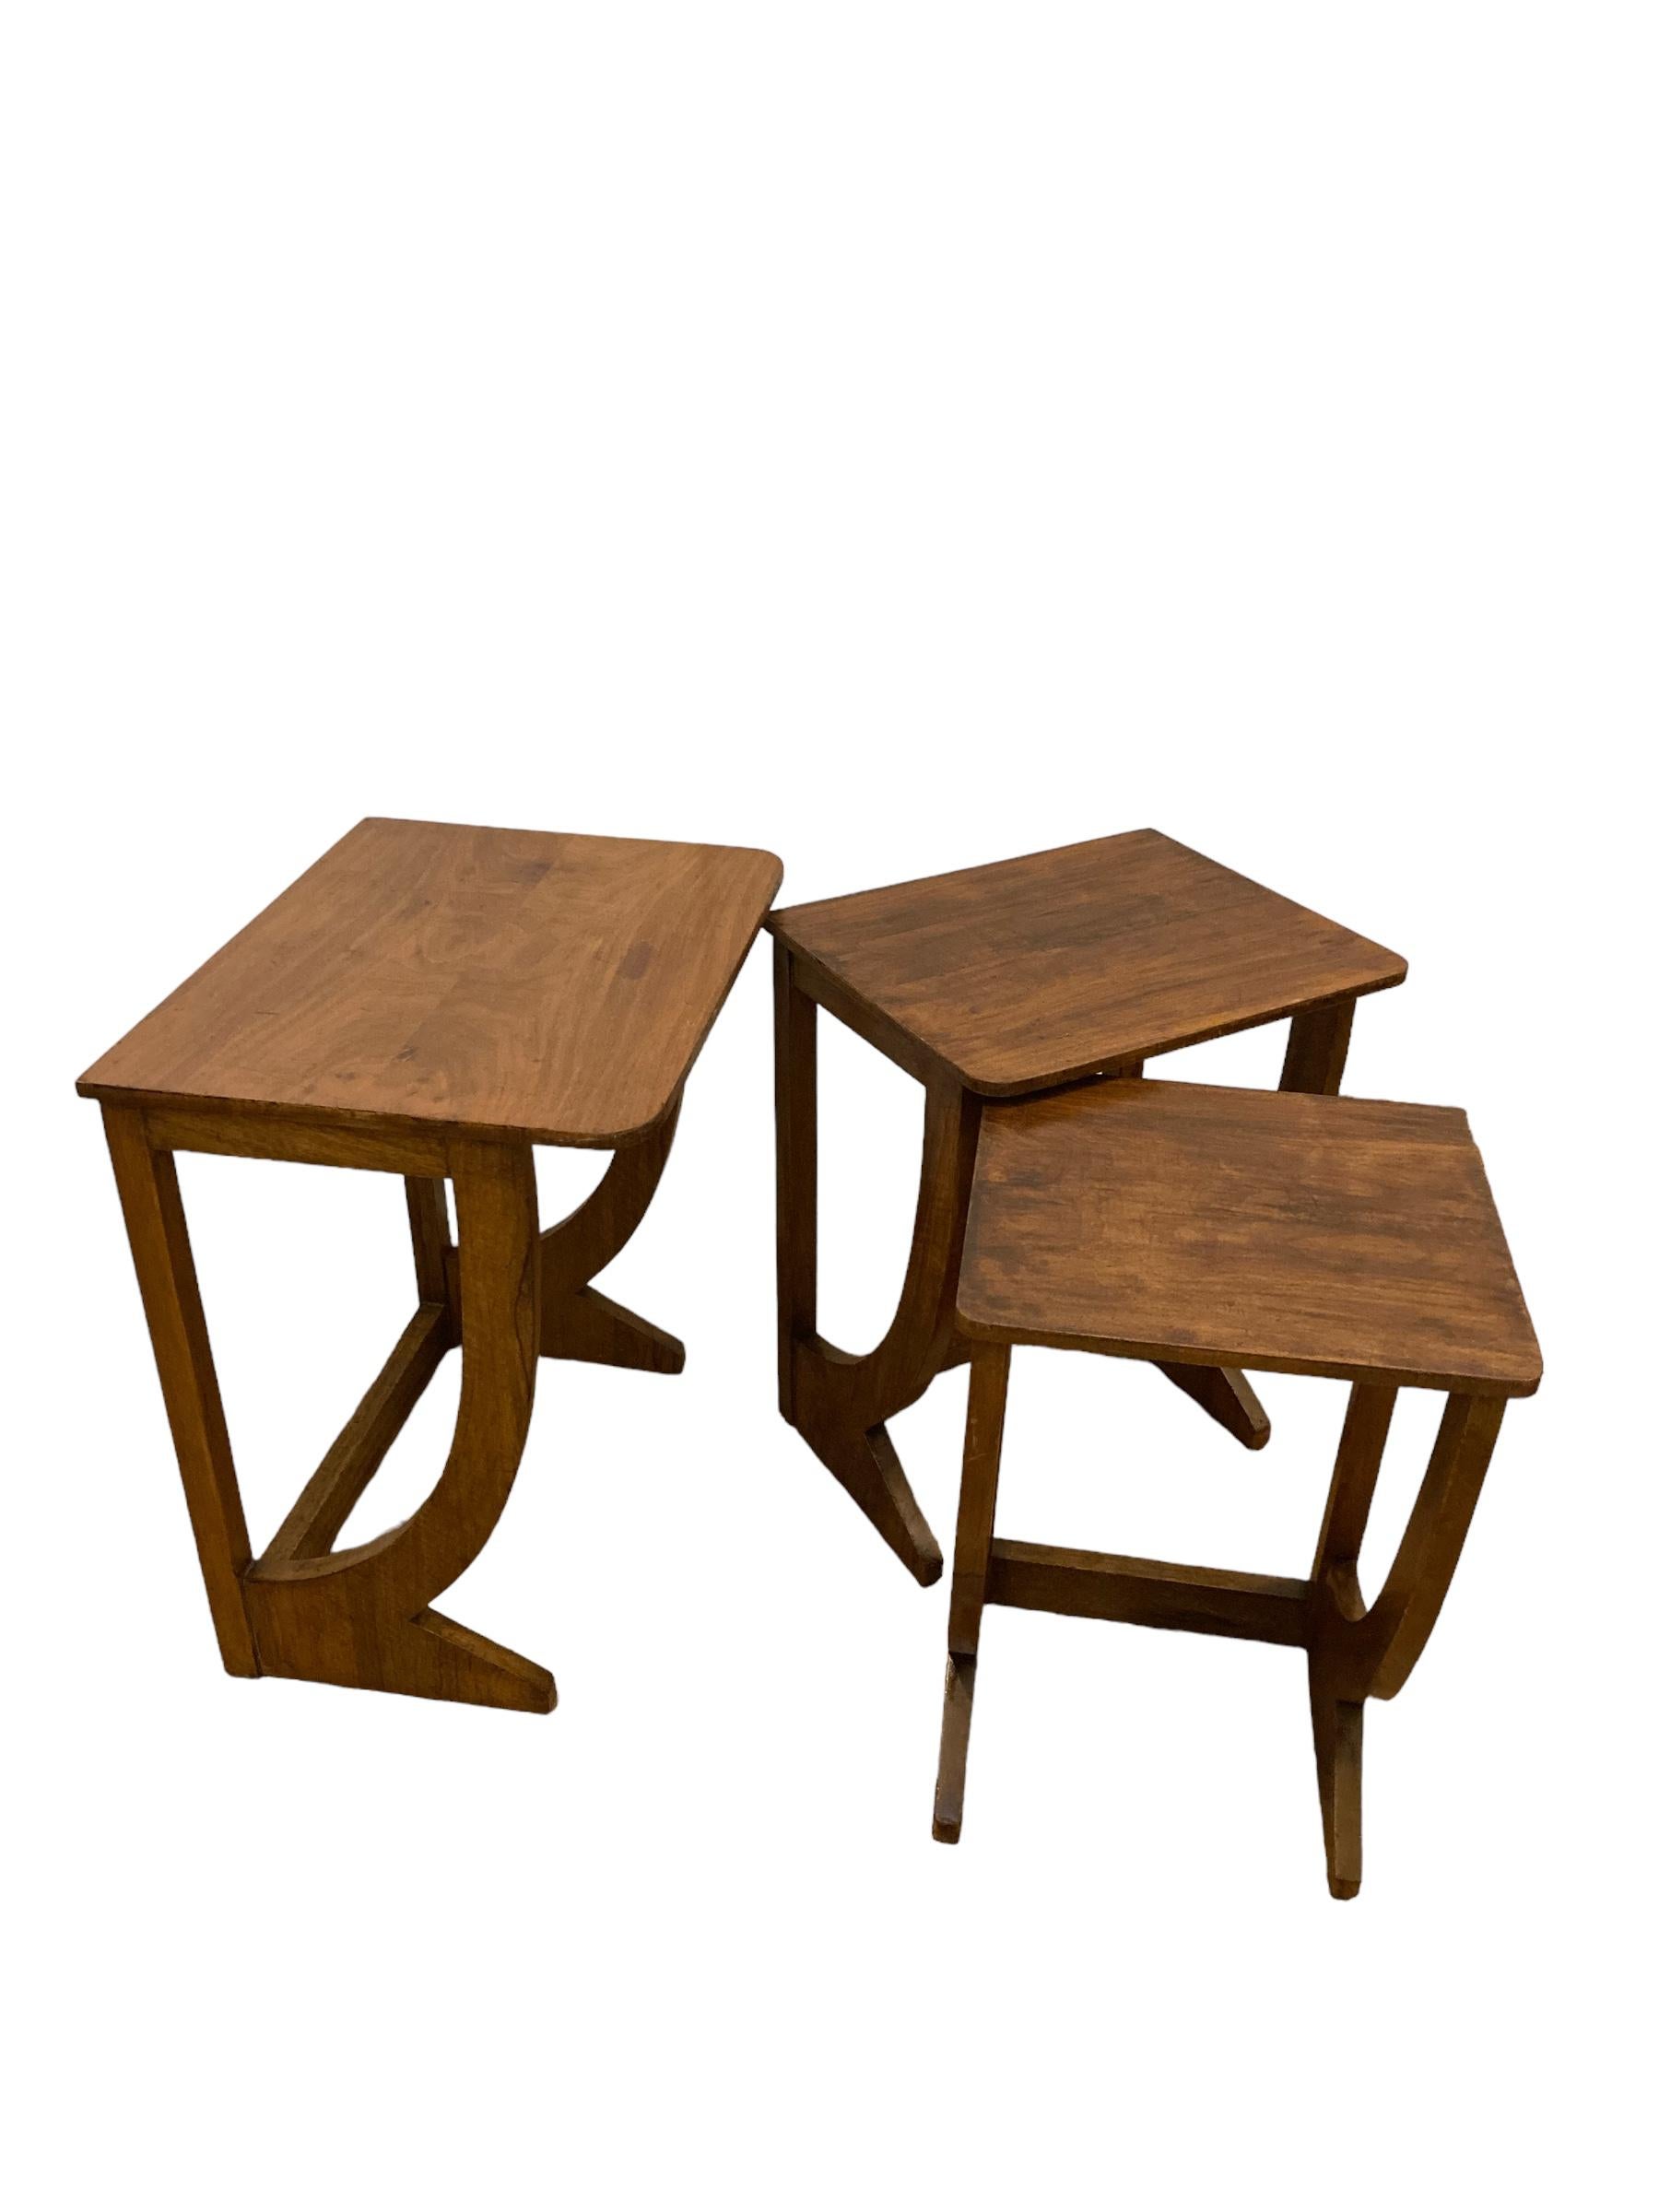 20th Century French Art Deco Walnut Nest of Tables For Sale